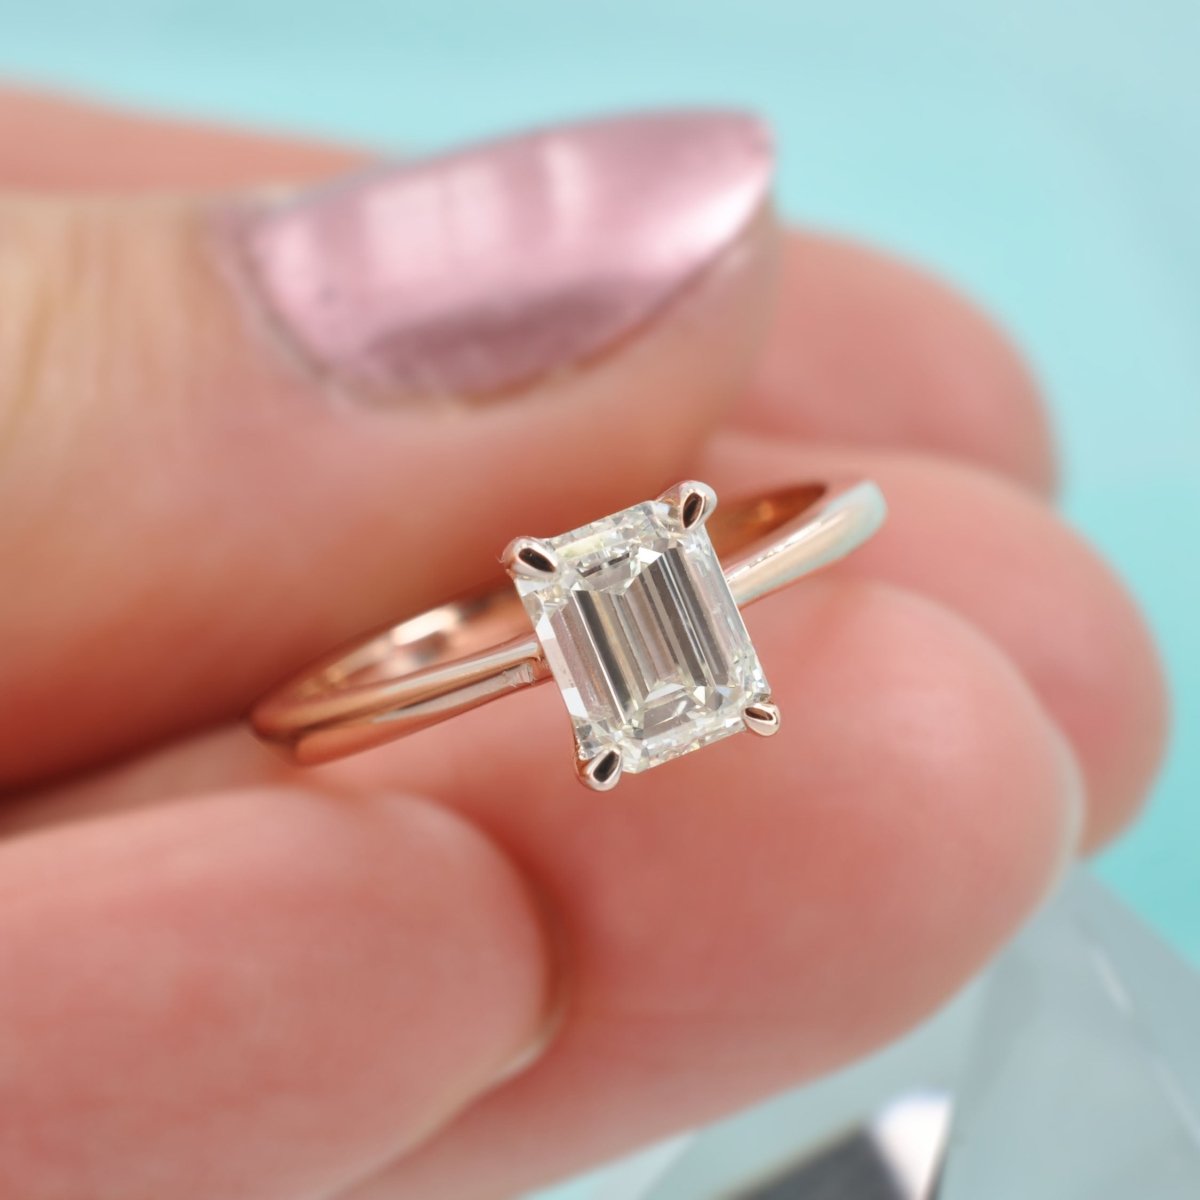 Breathtaking 1.52CT Emerald Cut Diamond Solitaire Ring in 14KT Rose Gold - Primestyle.com